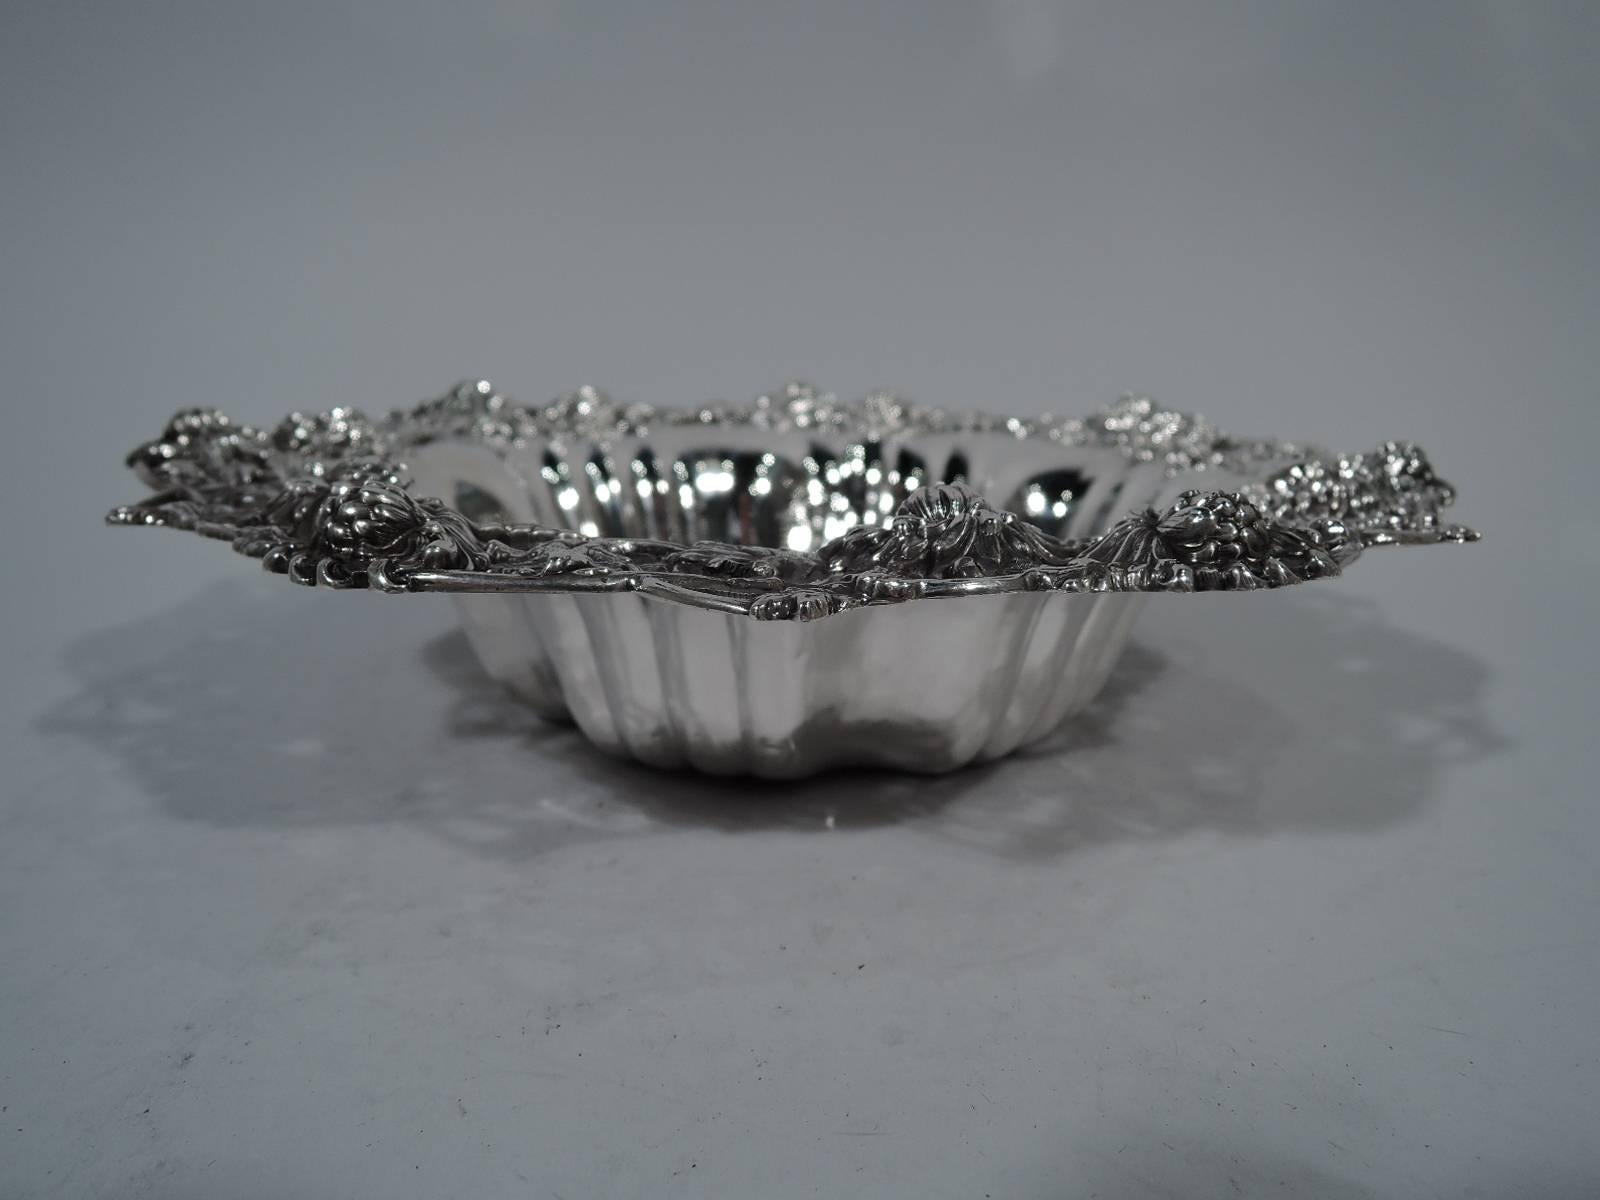 Sterling silver bowl with chrysanthemums. Made by Graff, Washbourne, & Dunn in New York, circa 1900. Tapering sides with interior fluting. Applied rim with chrysanthemums on open interlaced branches. Beautiful blossoms – a charming period motif.